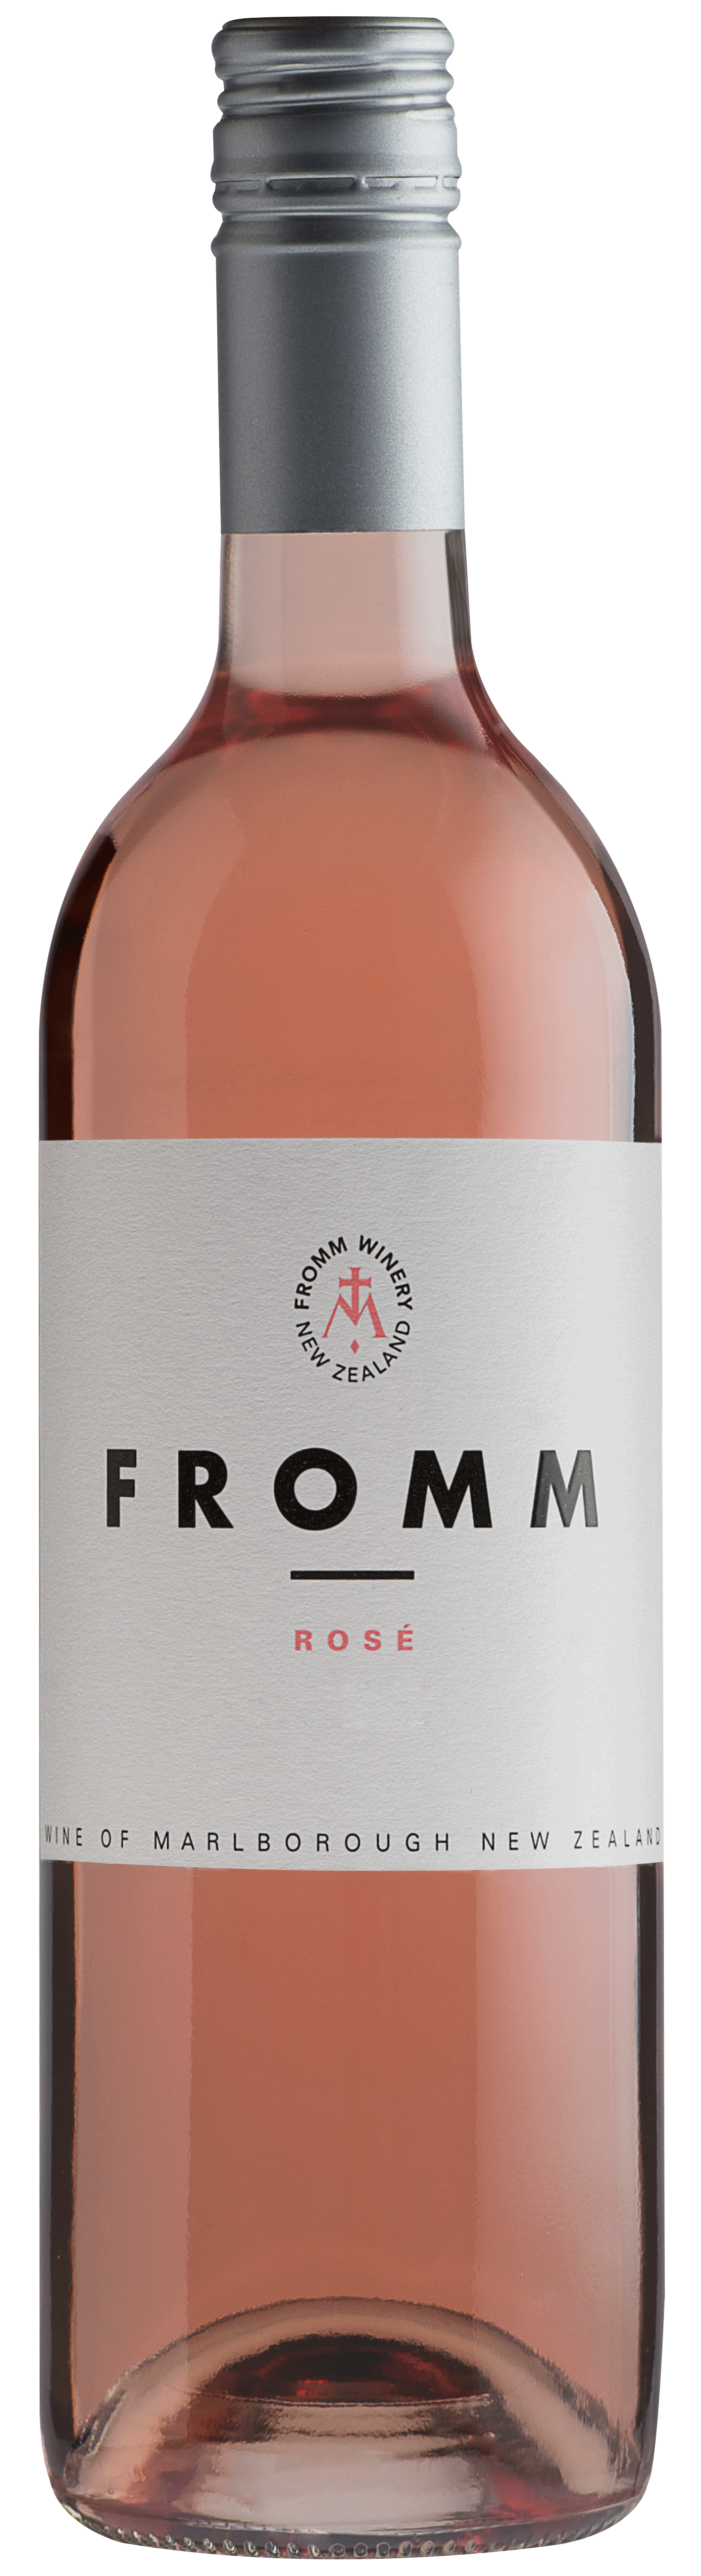 FROMM Rosé 2018 - SOLD OUT